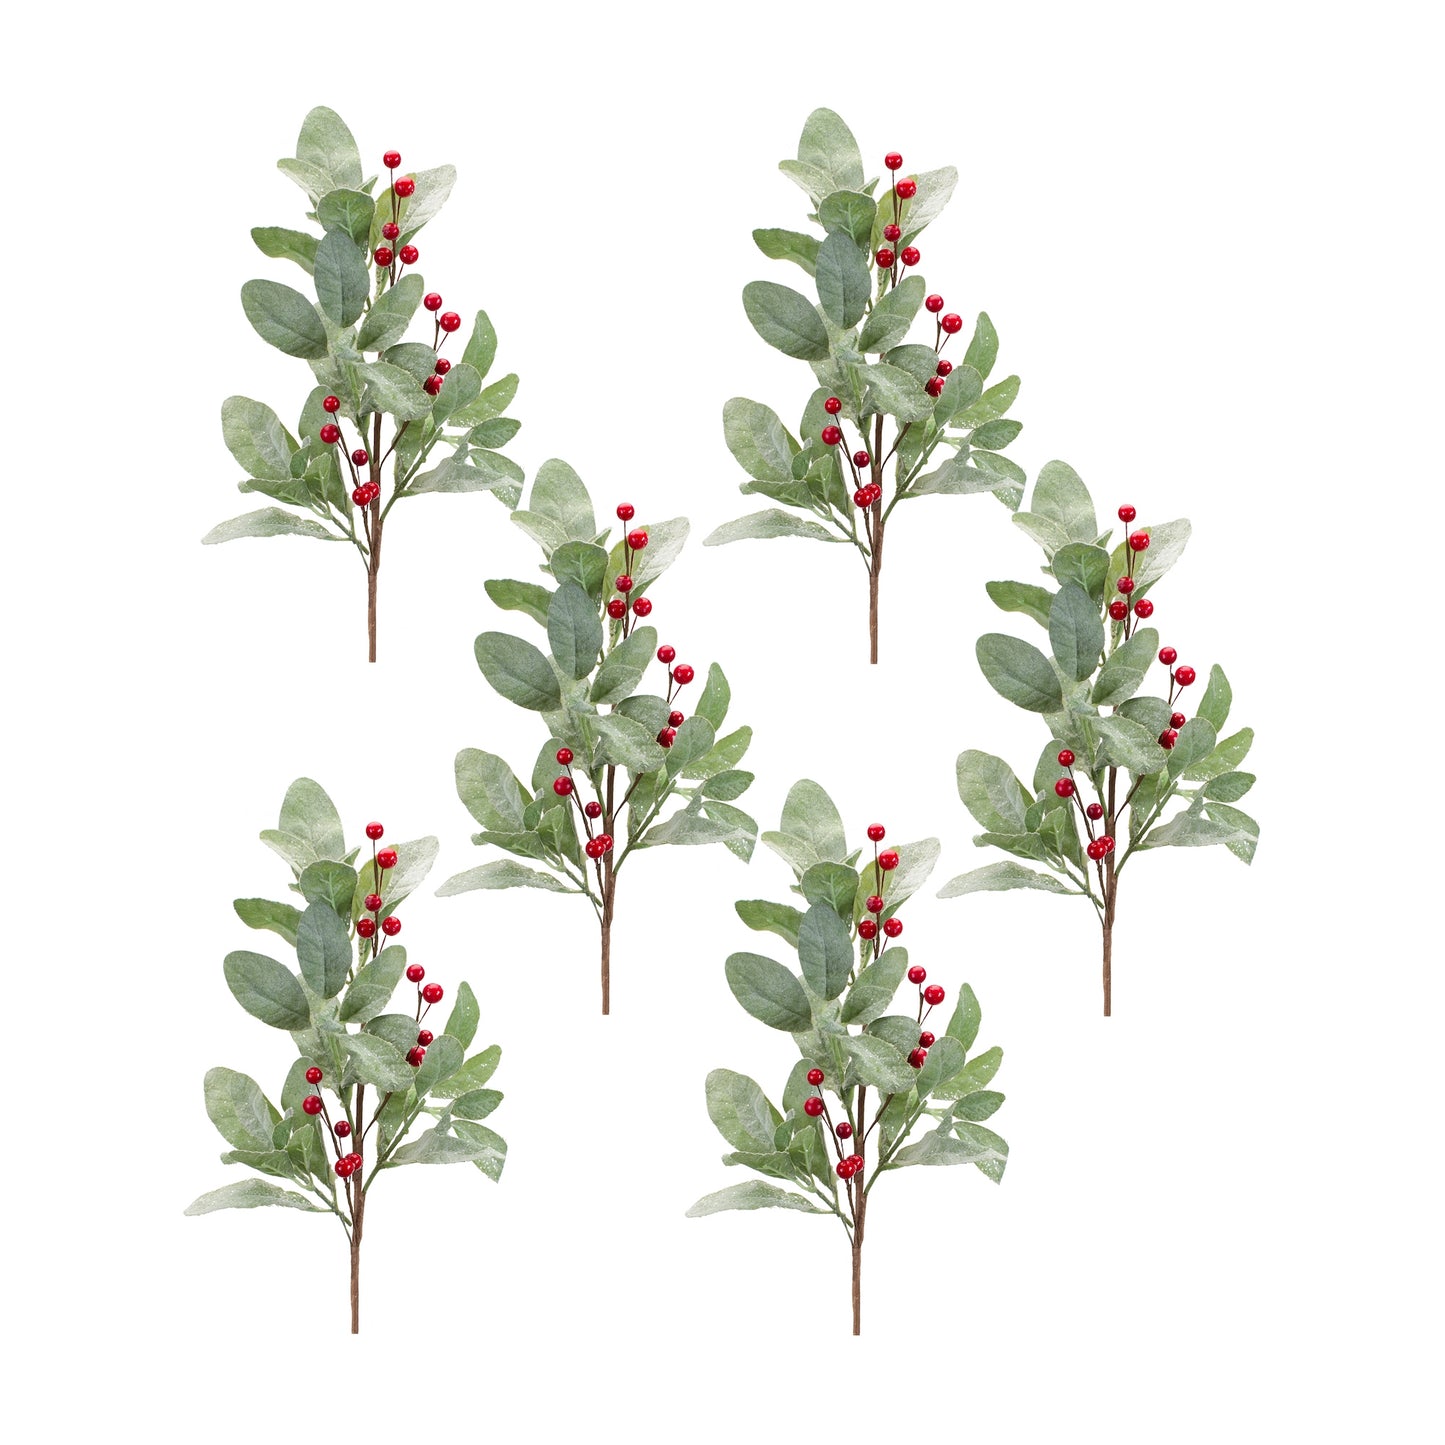 Frosted Mistletoe Spray with Berries (Set of 6)